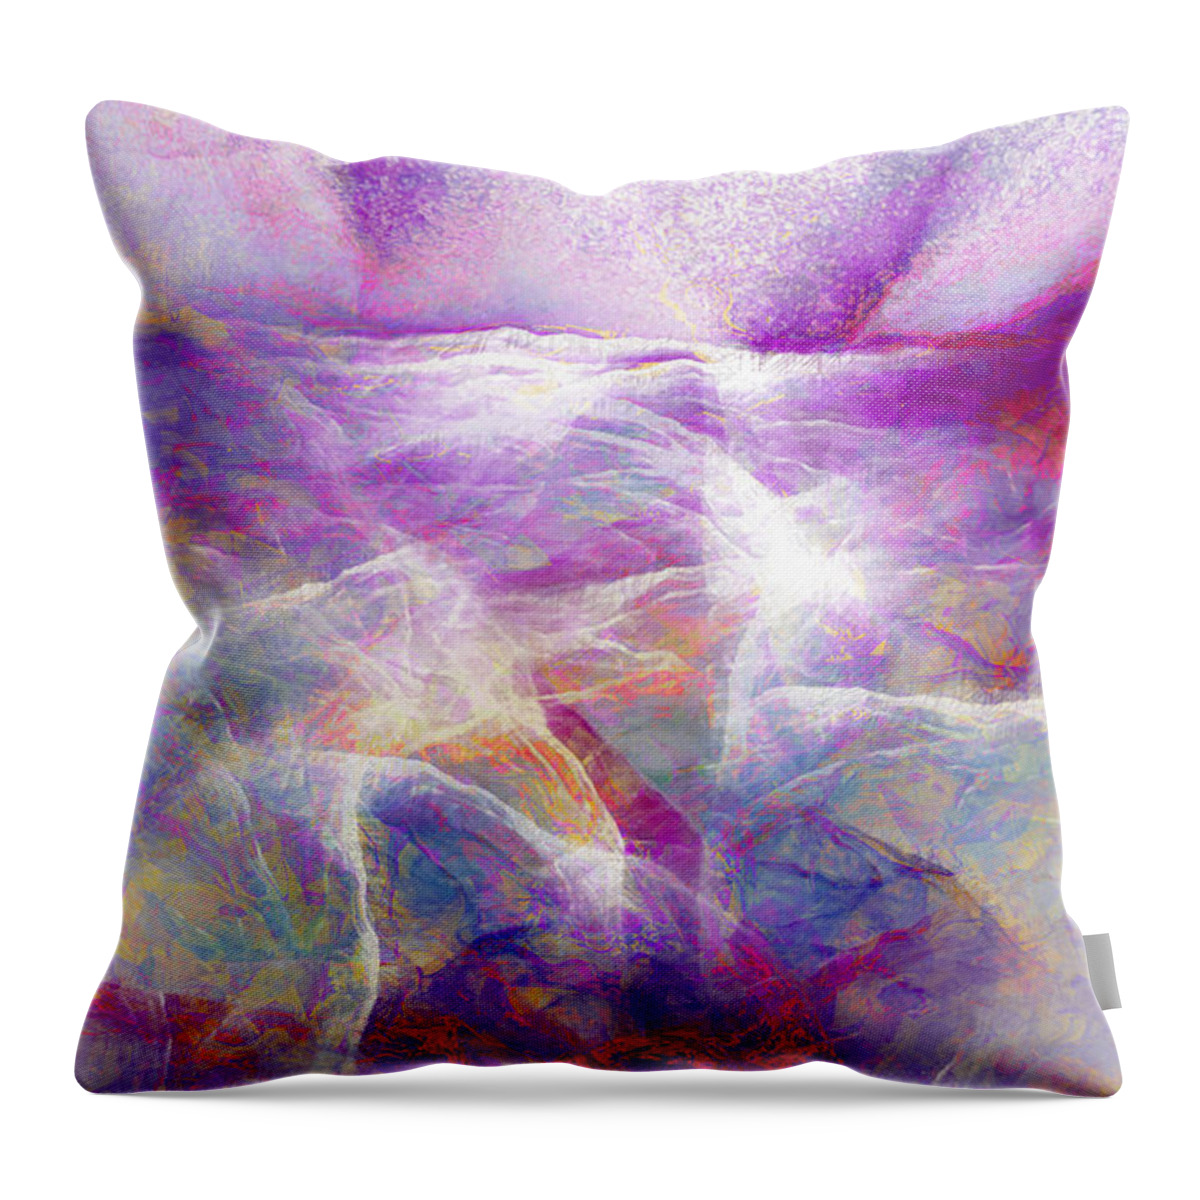 Abstract Art Throw Pillow featuring the painting Walk On Water - Abstract Art by Jaison Cianelli